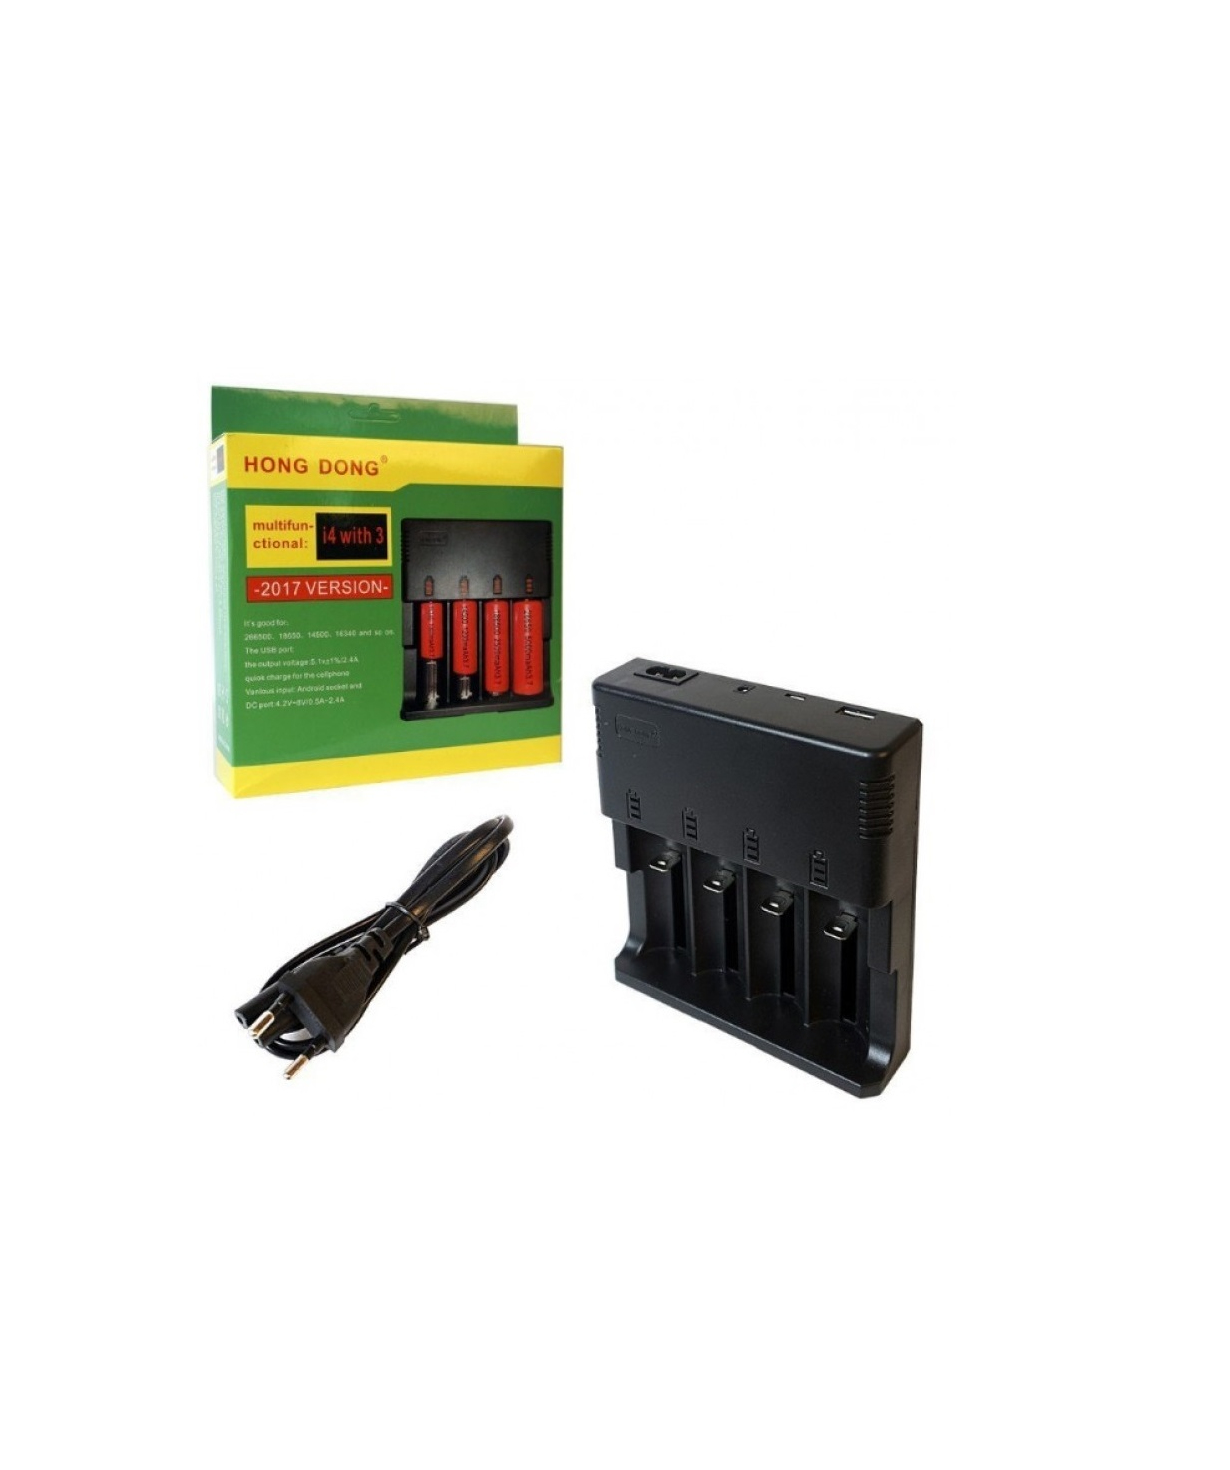 LITHVAN BATTERY MULTI-FUNCTION CHARGER I4 WITH 3